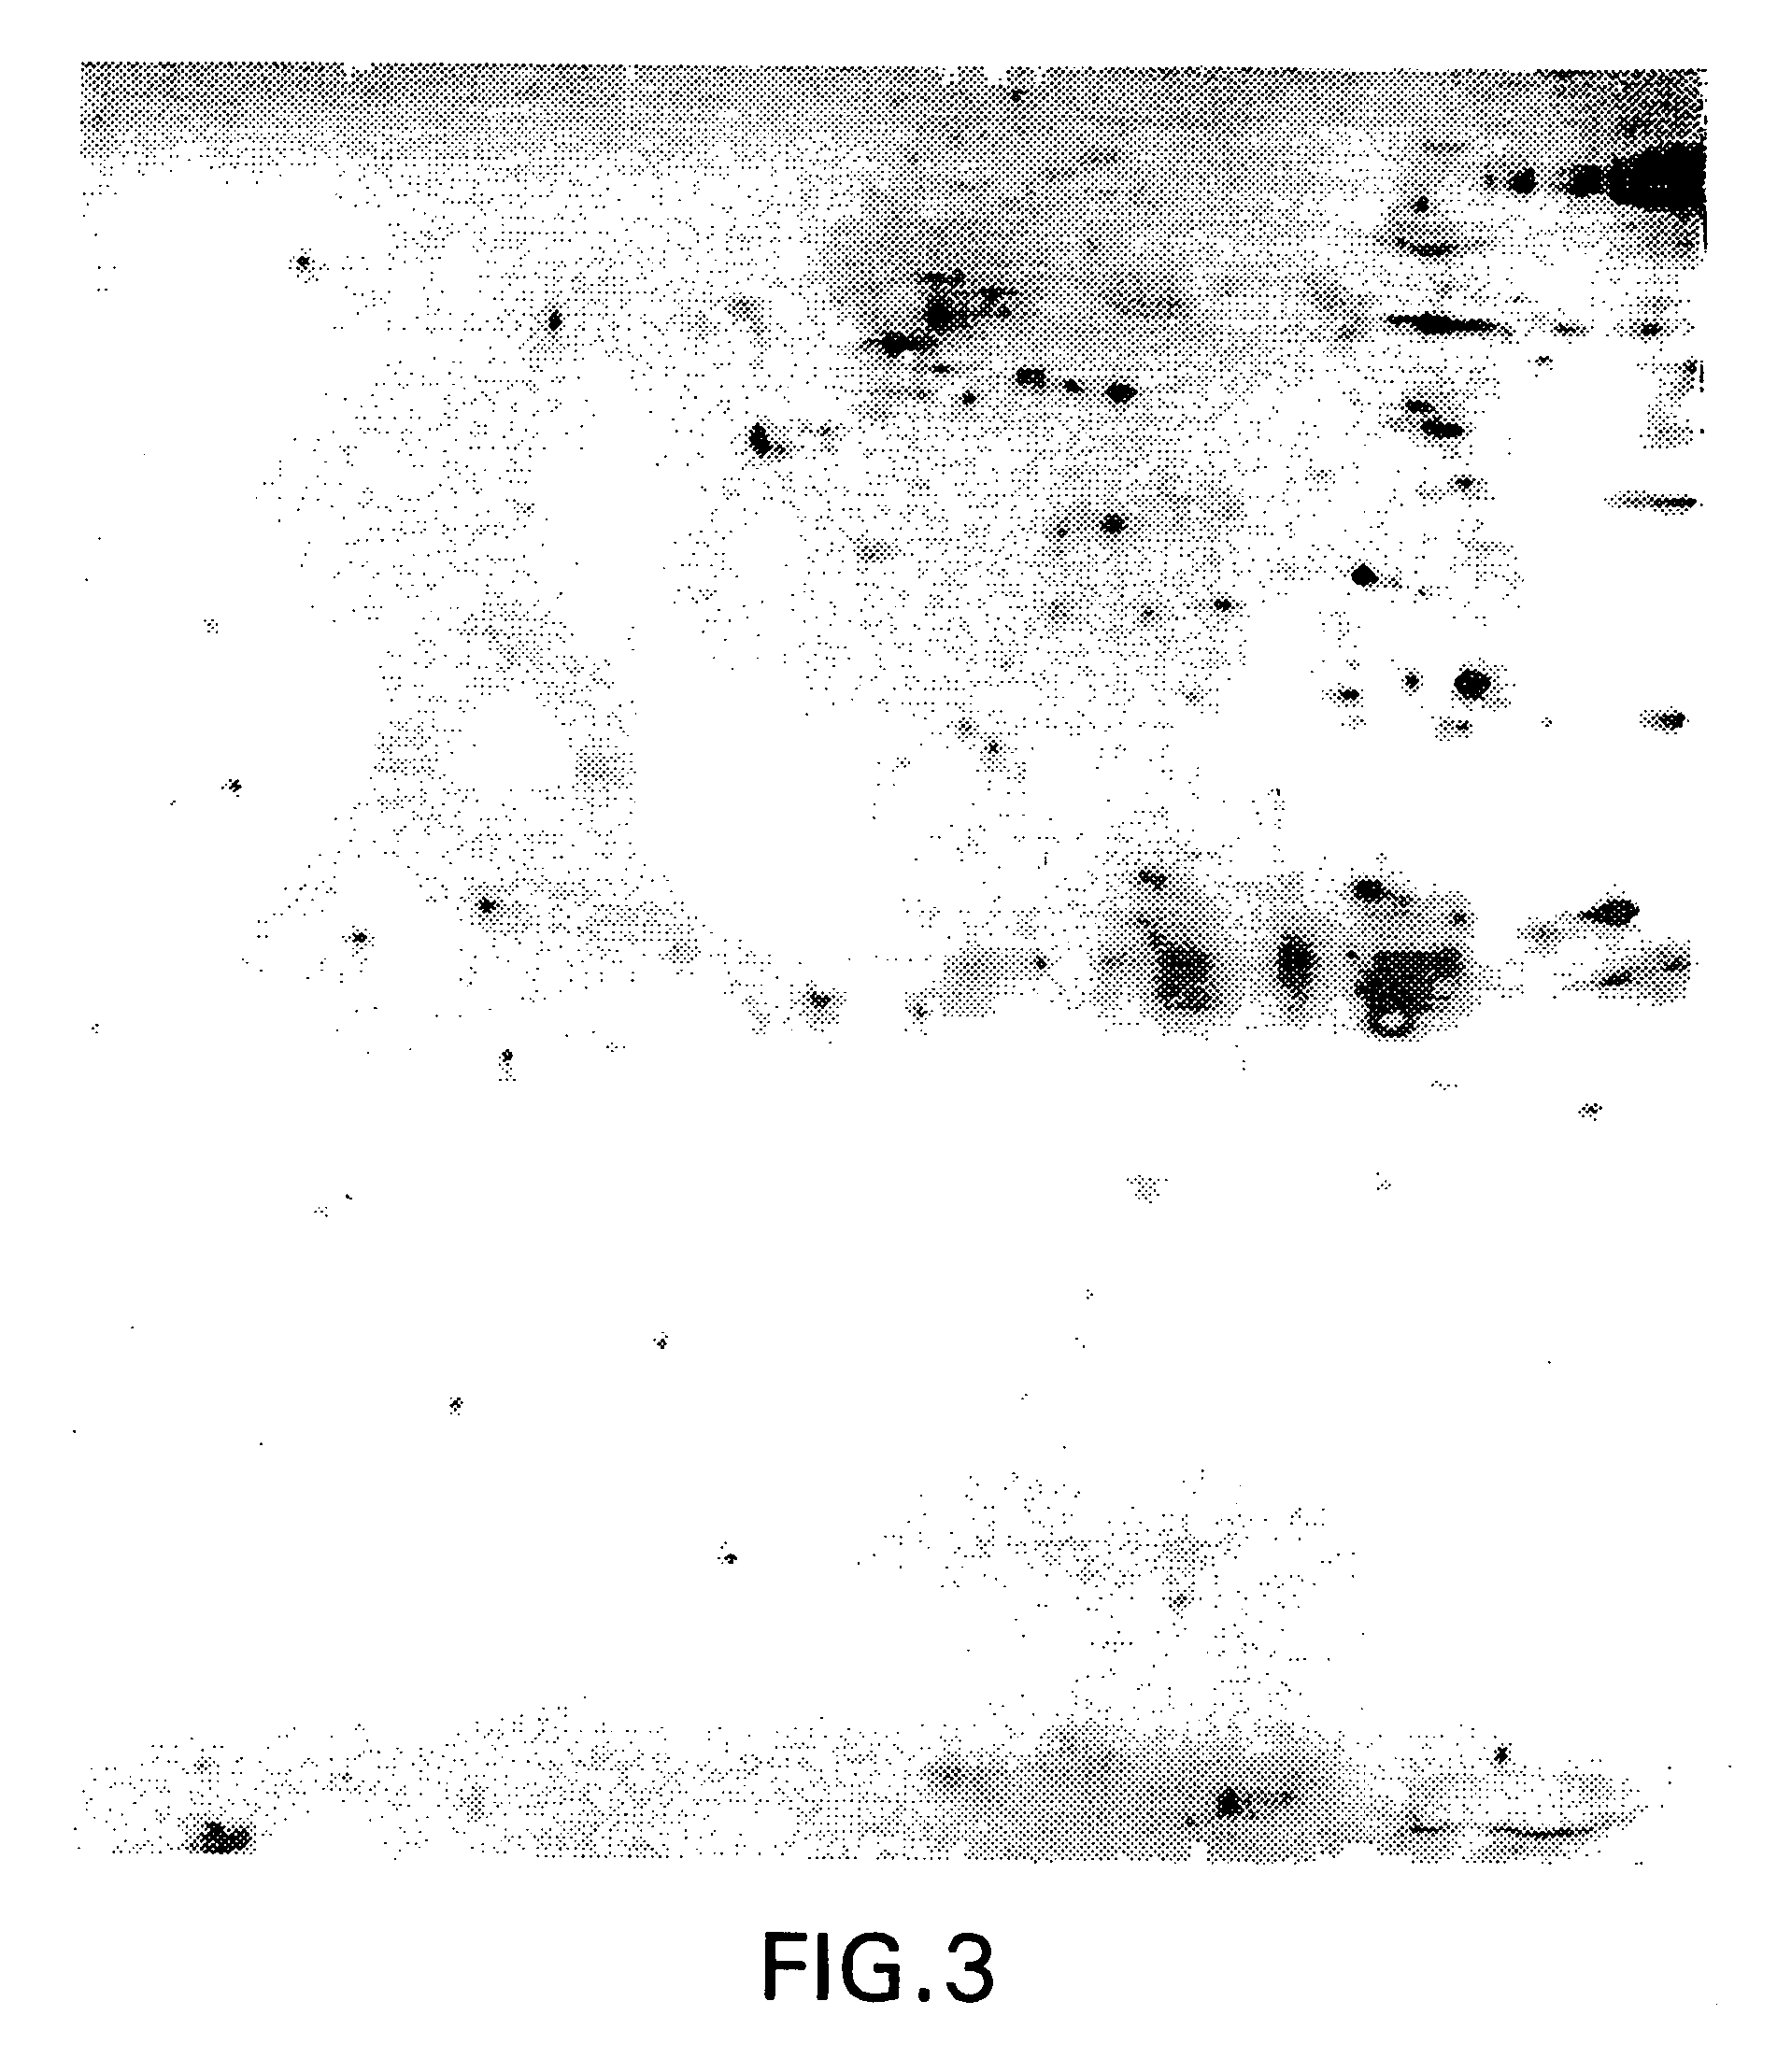 Method for identification of cellular protein antigens and presence of antibodies to specific cellular protein antigens in serum